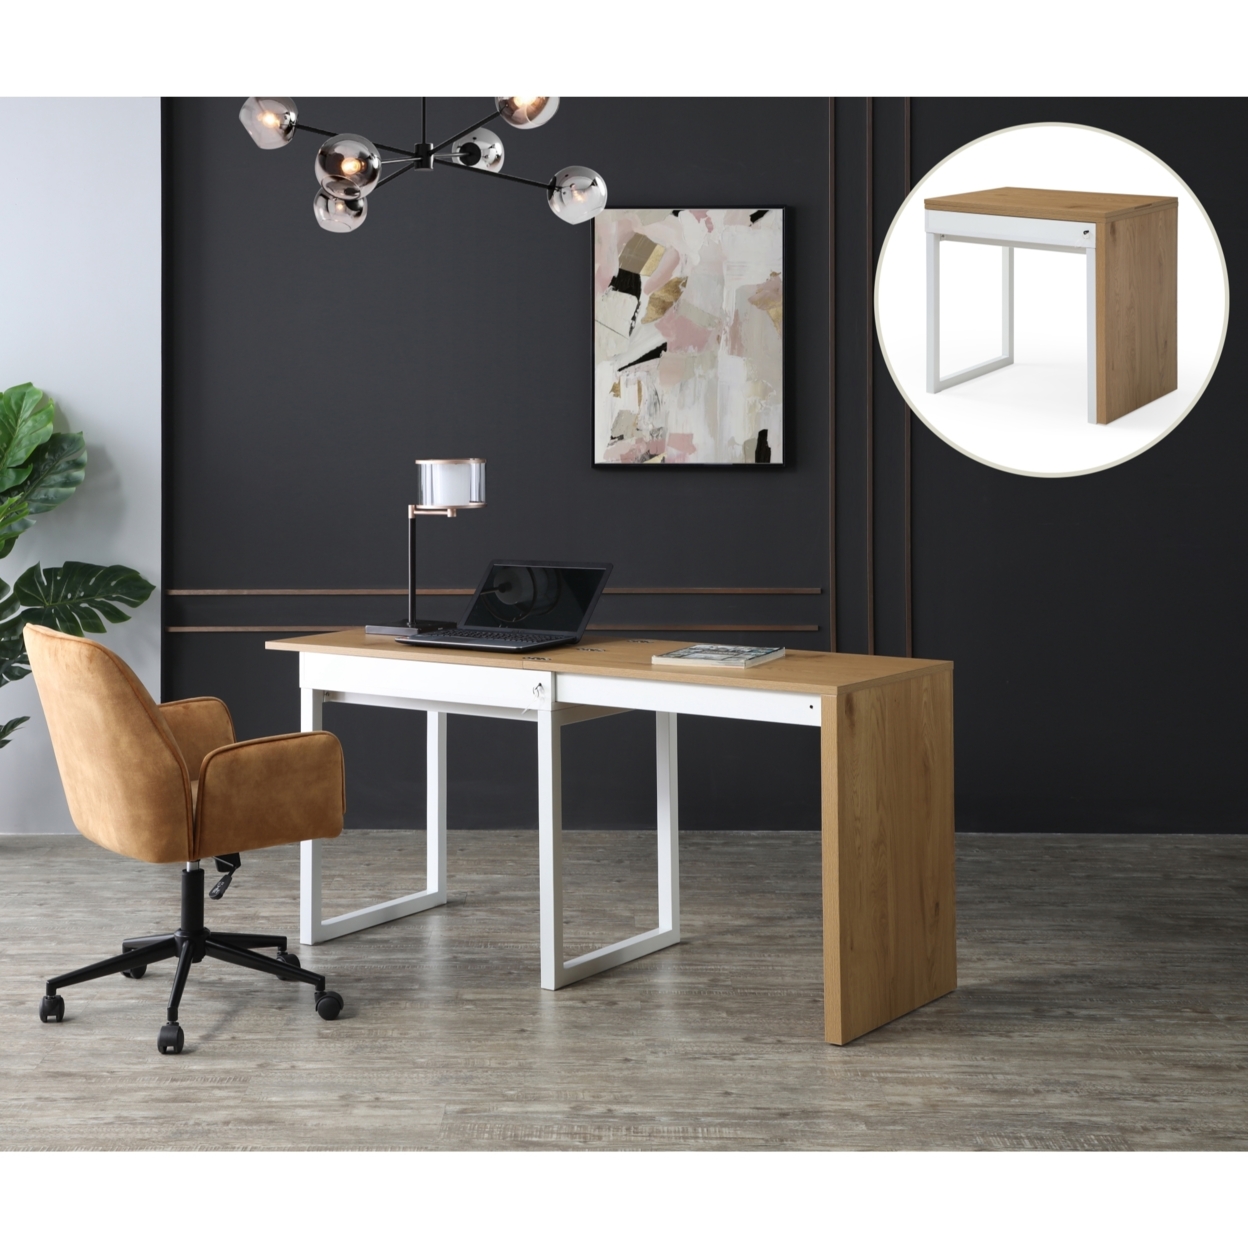 Ashly Desk-Extendable, Space Saving Design-2 Top Open Storage Compartments-A Lock with a Key - natural/white